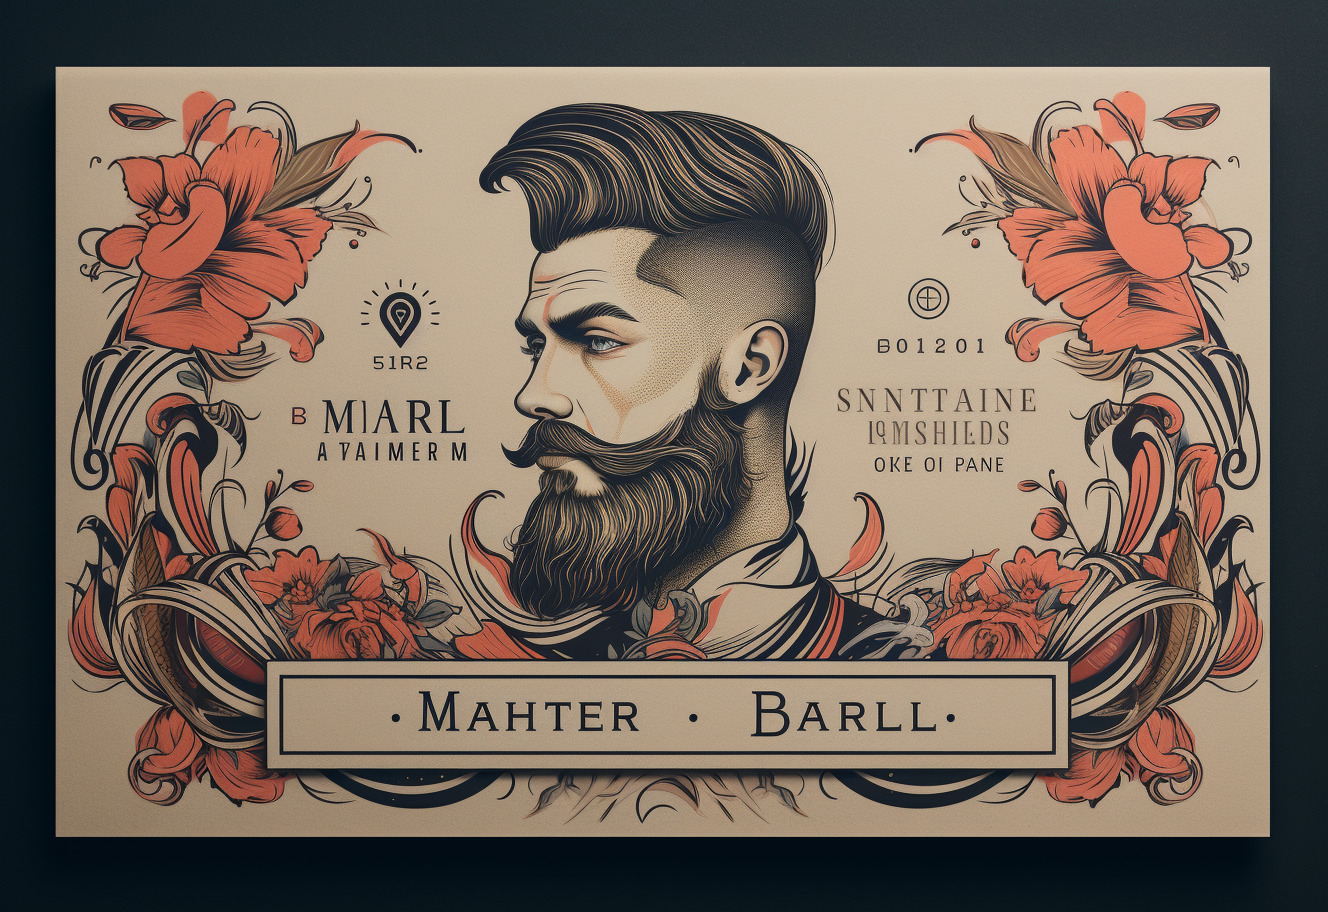 Download Free PSD Bearded Man Business Card Imagery